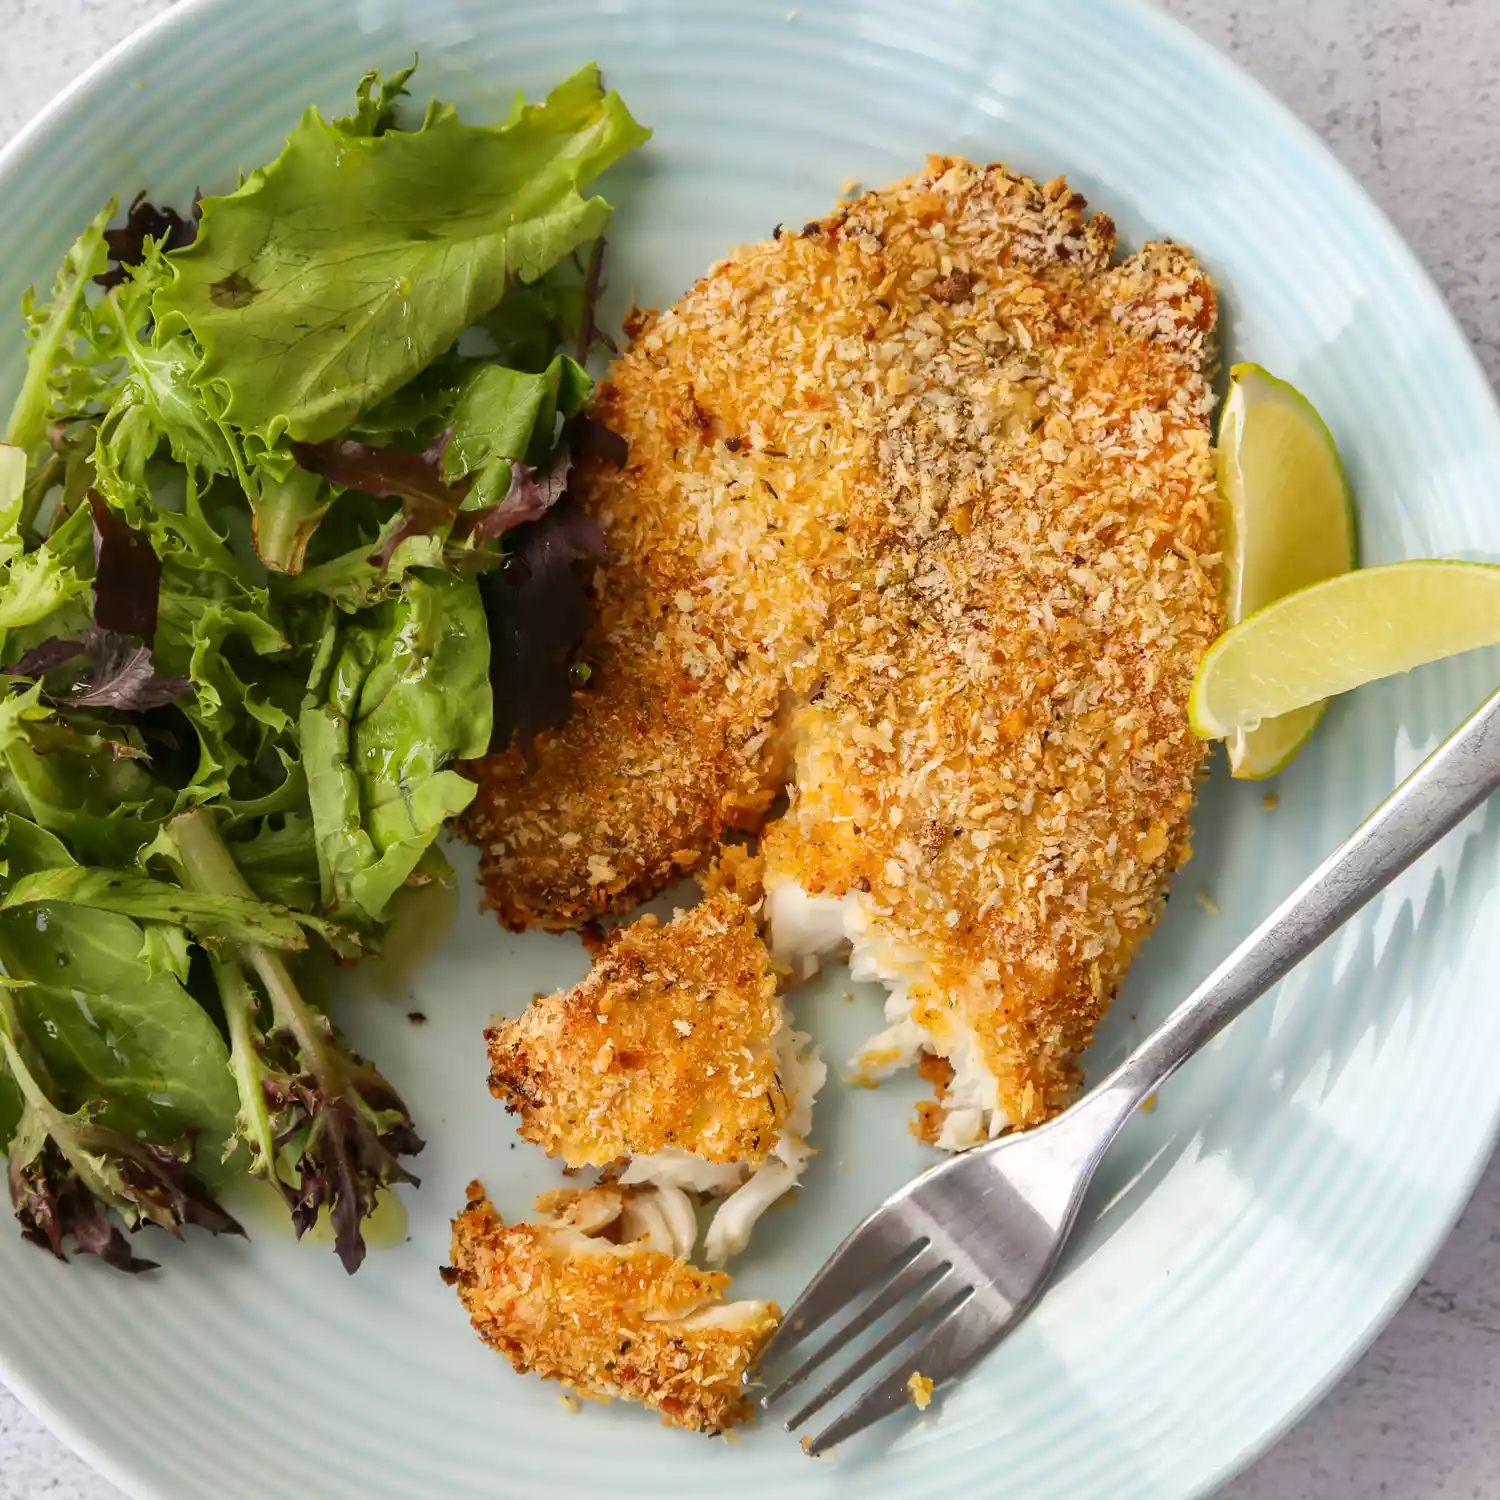 Crunchy panko-crusted baked tilapia with salad greens on a plate